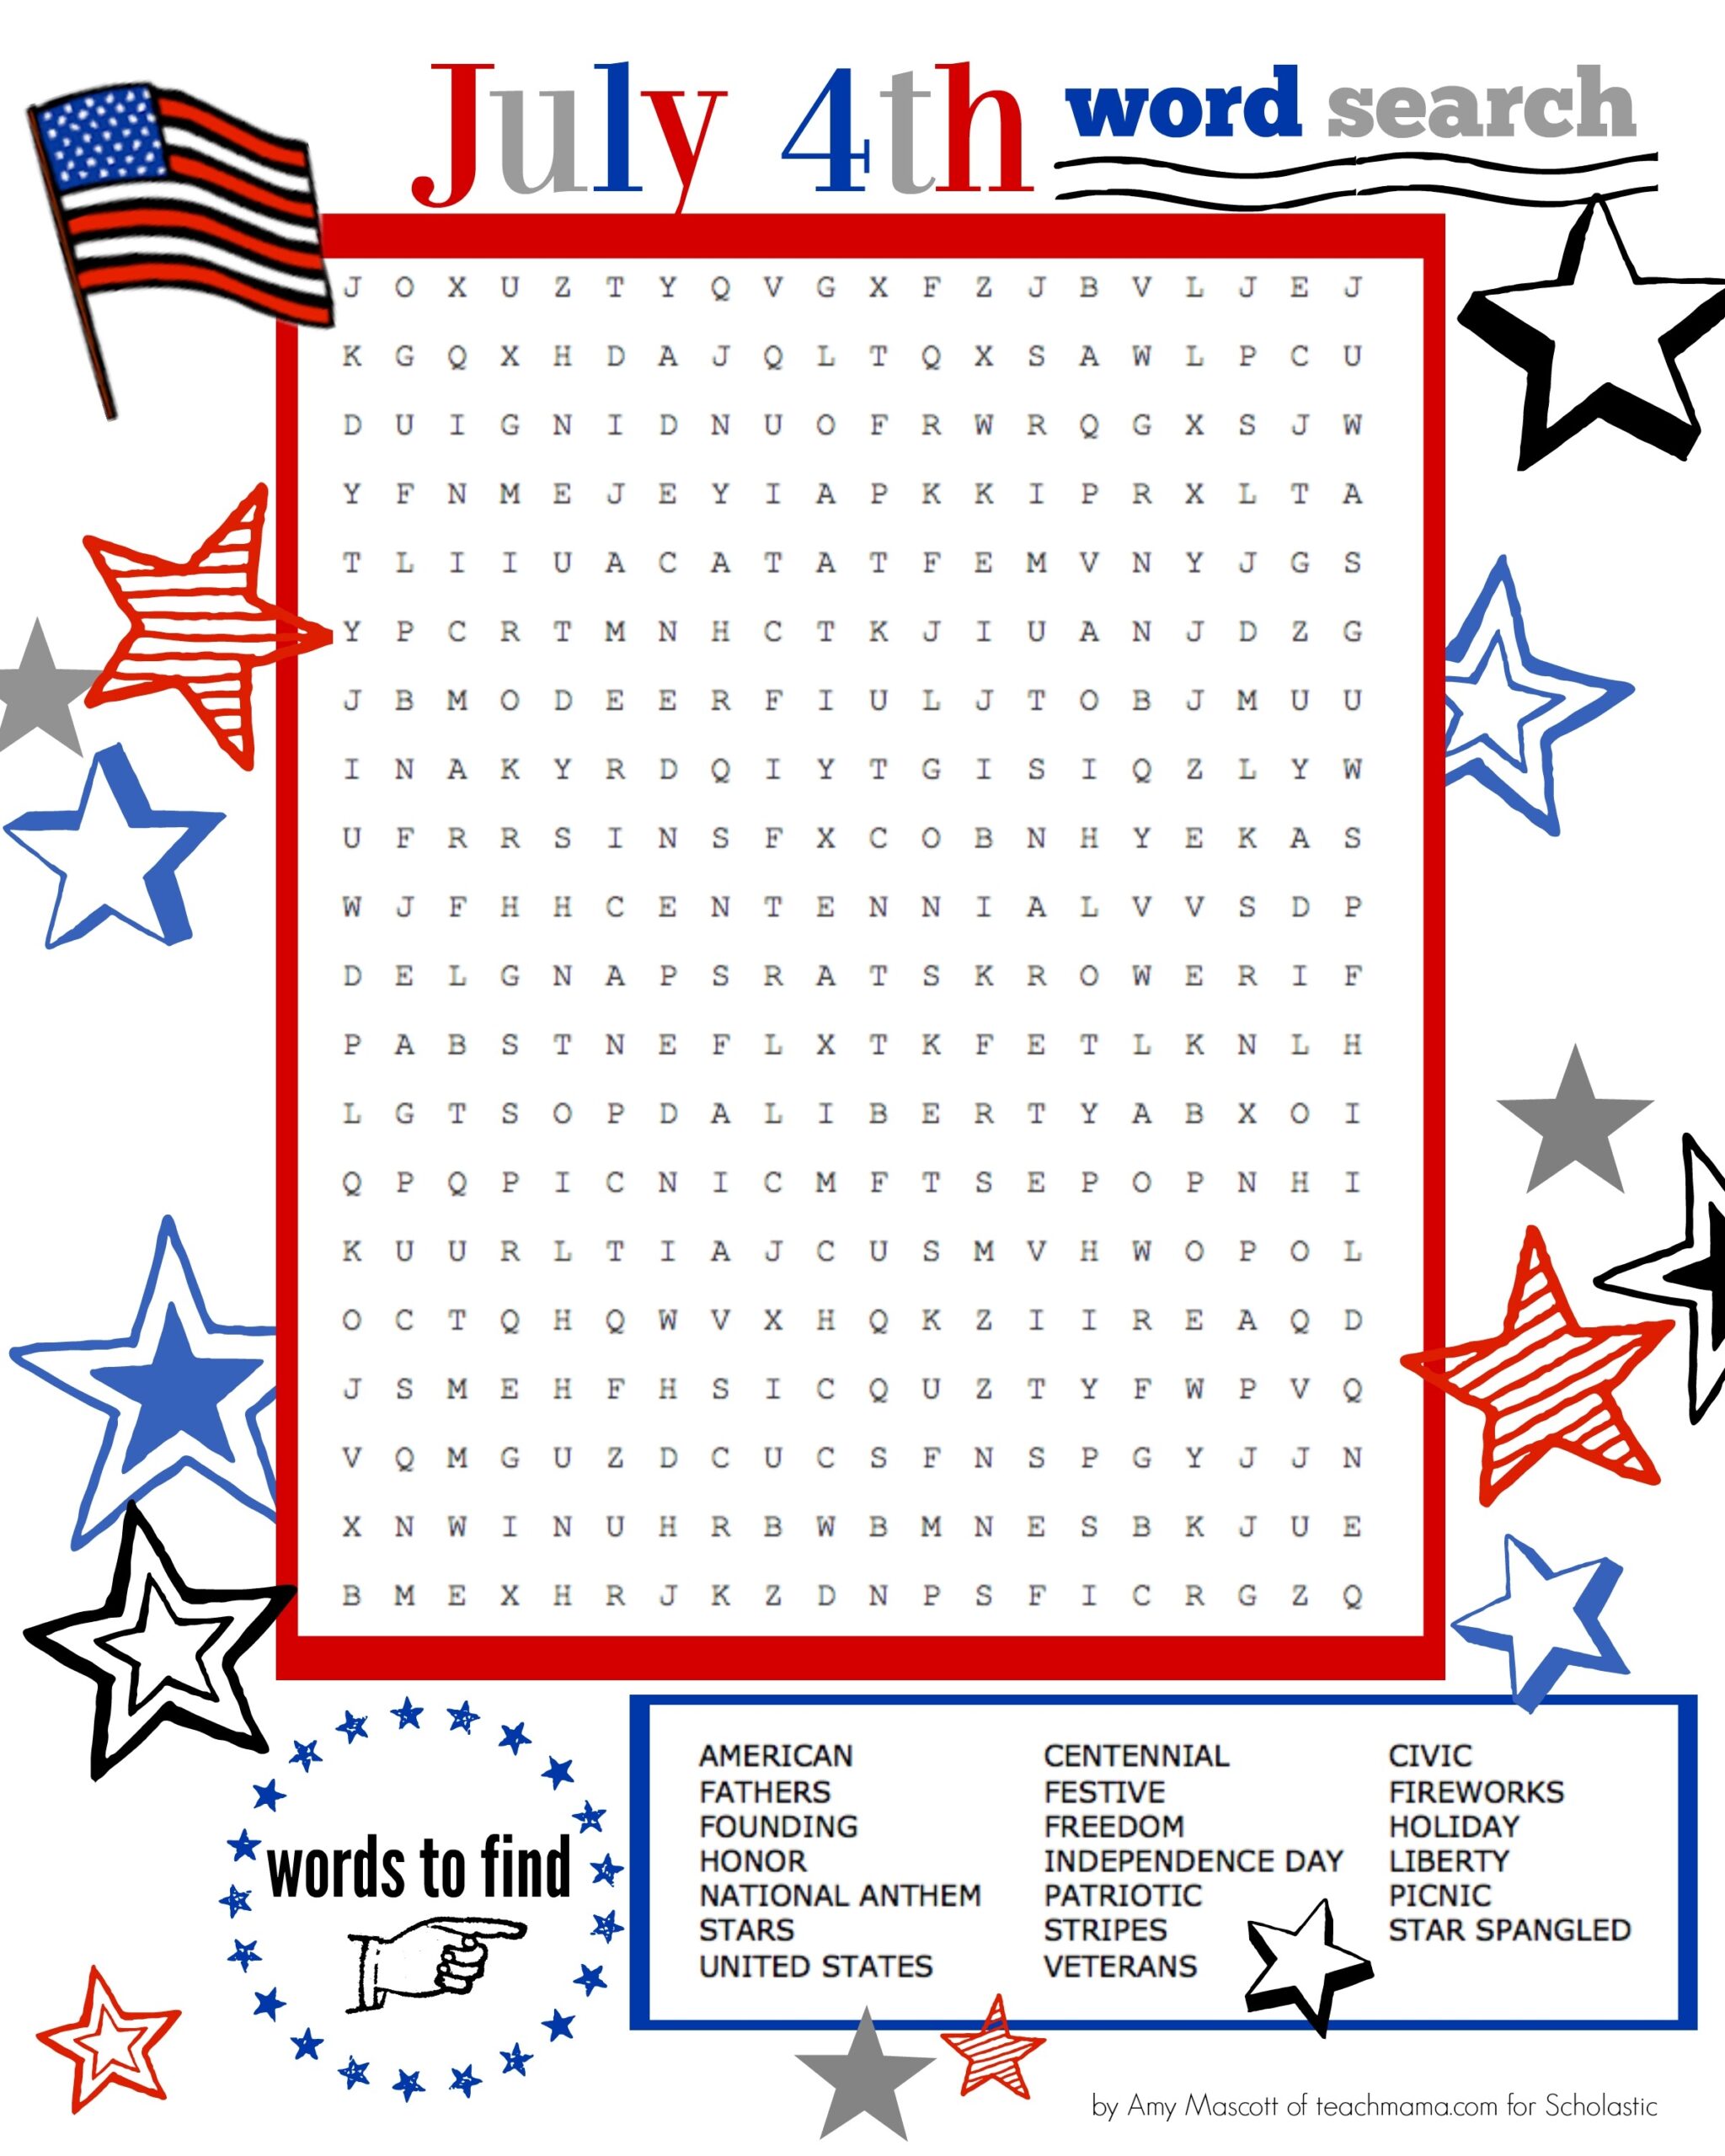 Superstar Celebration July 4th Word Search Printable